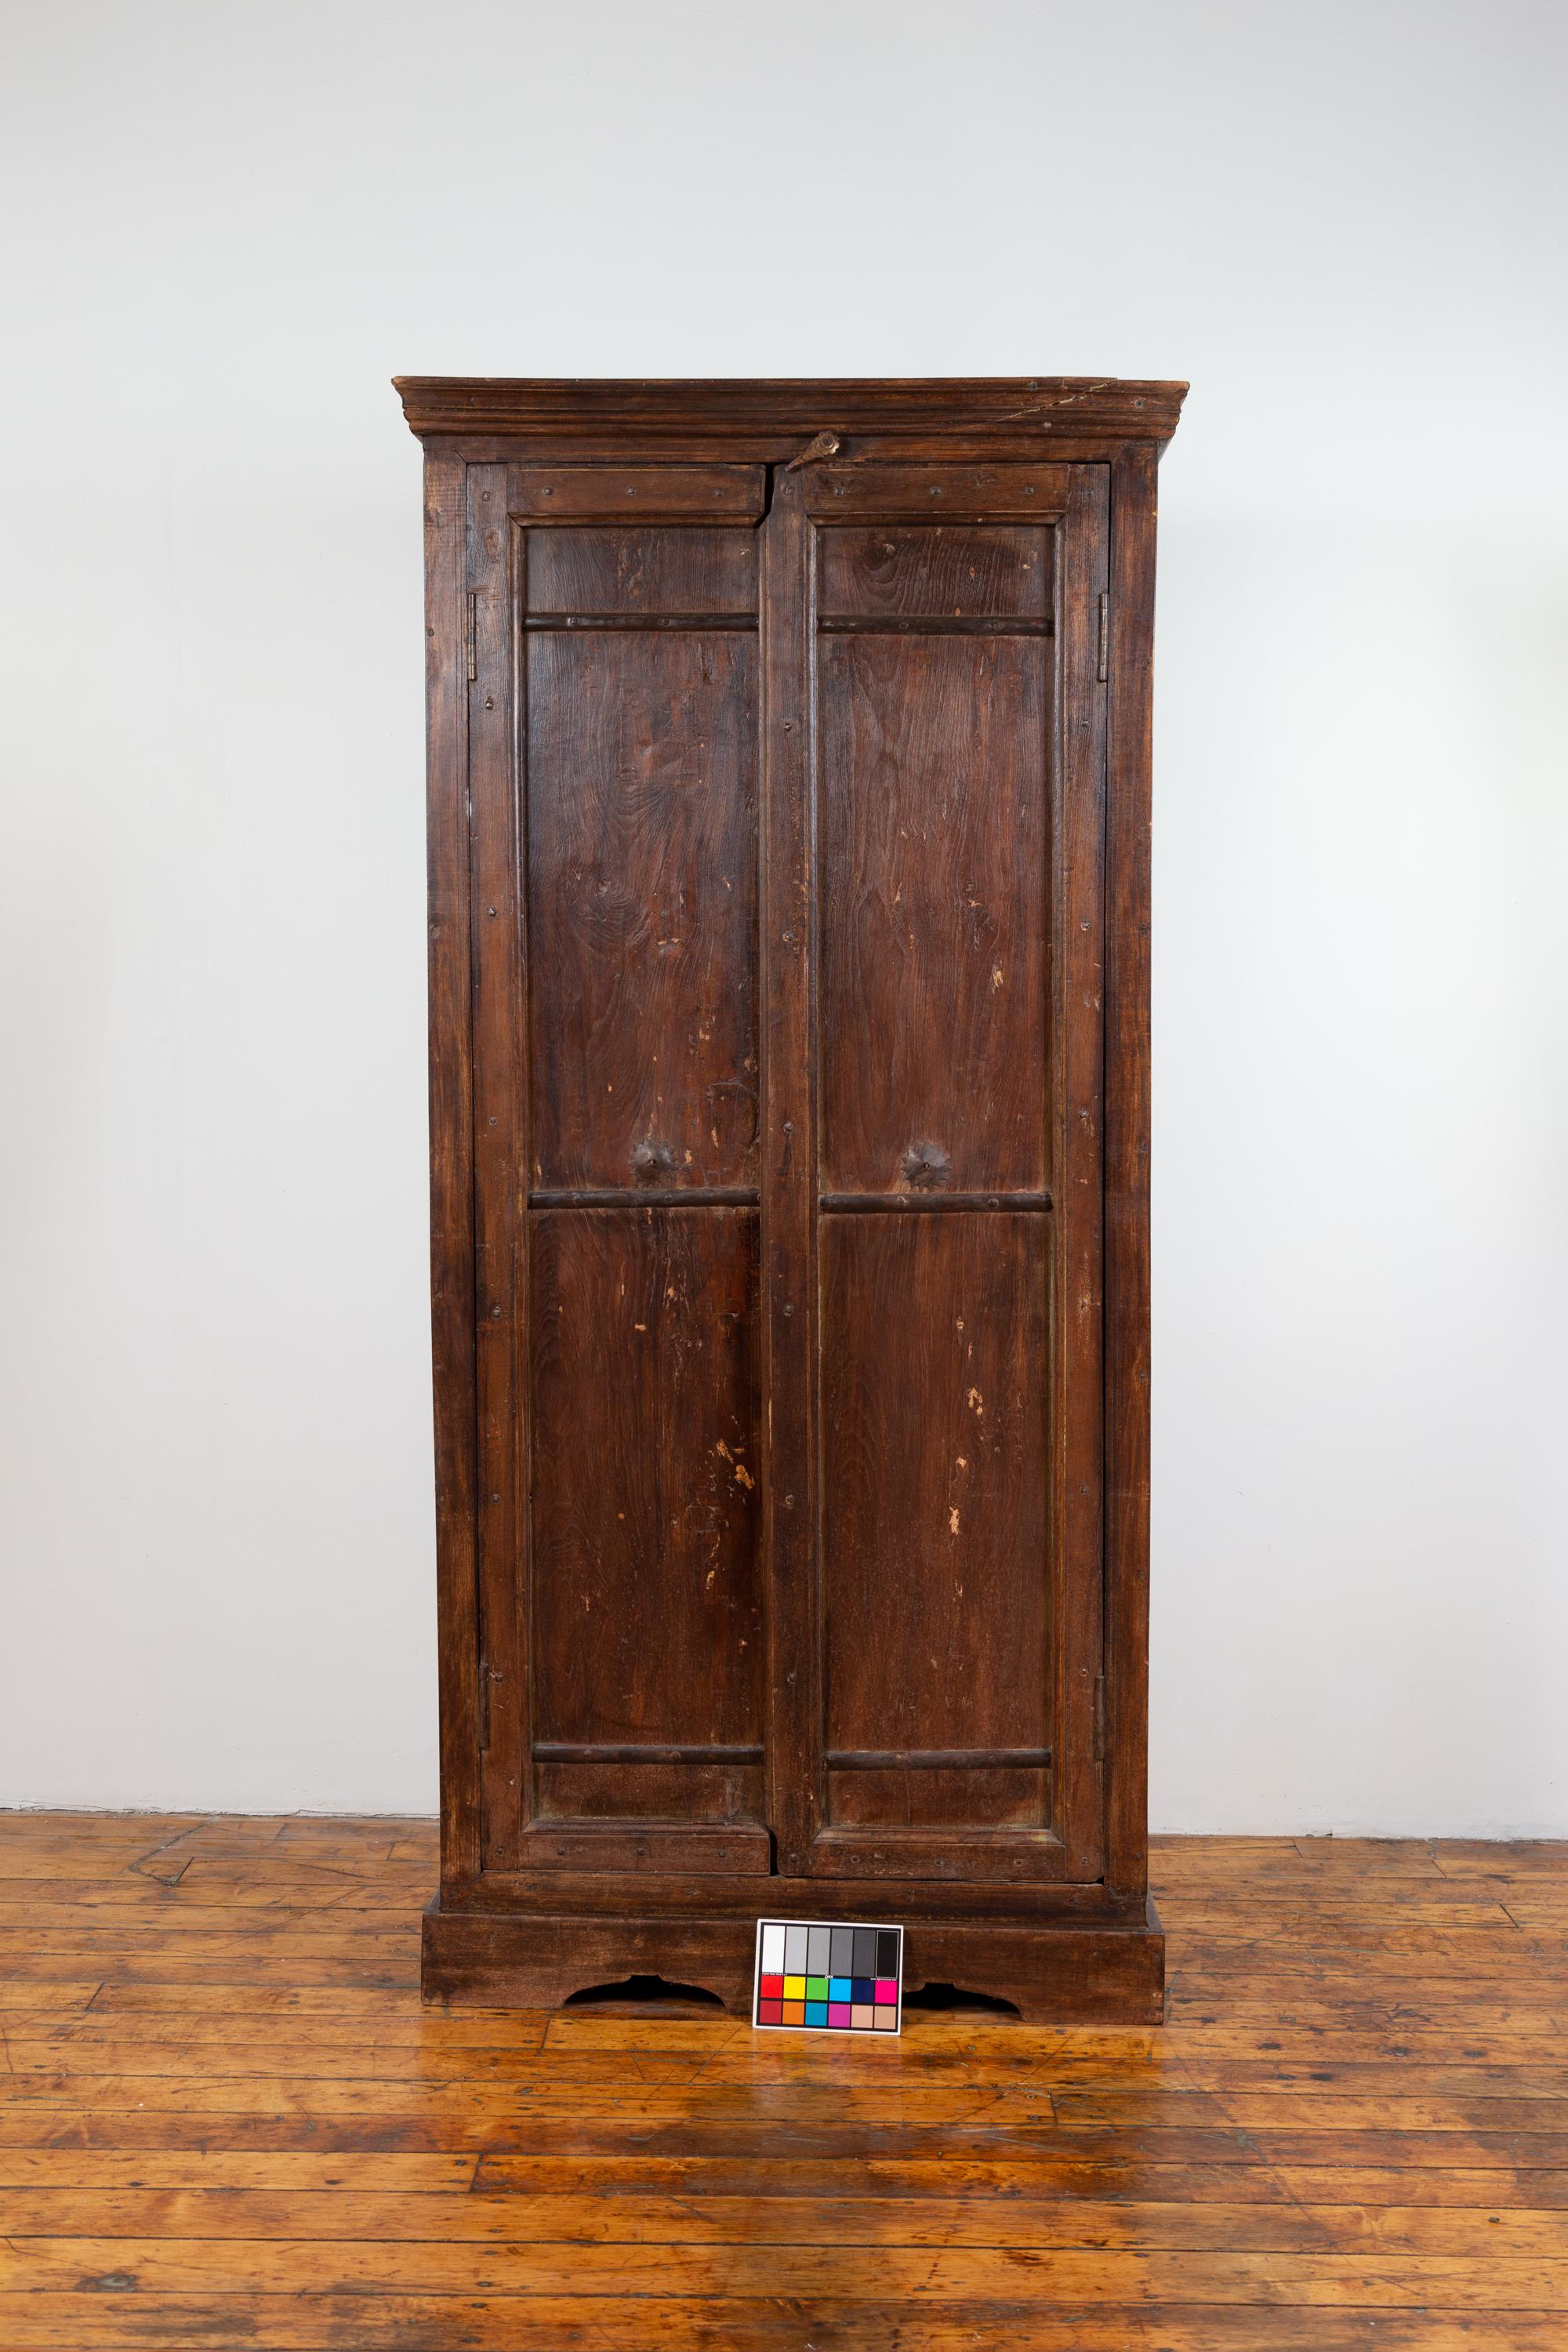 Indian Antique Wooden Armoire with Paneled Doors, Metal Braces and Aged Patina 12